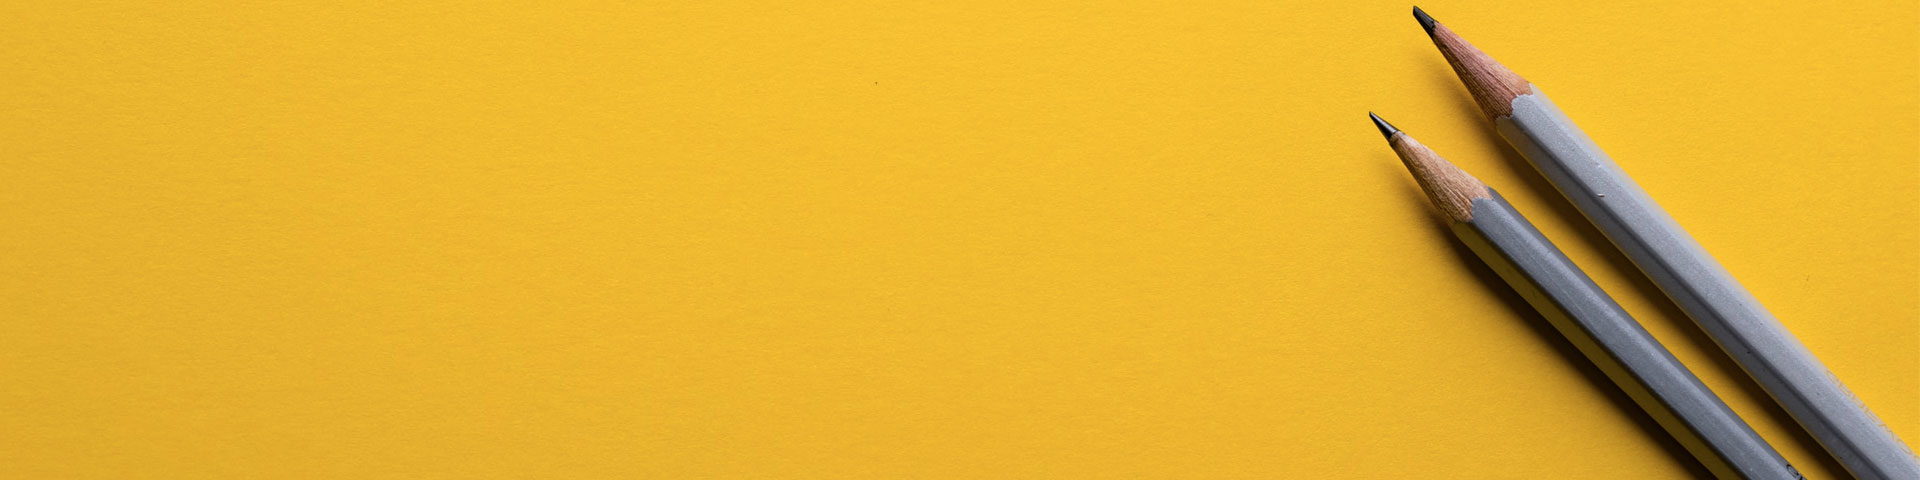 Two grey pencils rest on a yellow background.